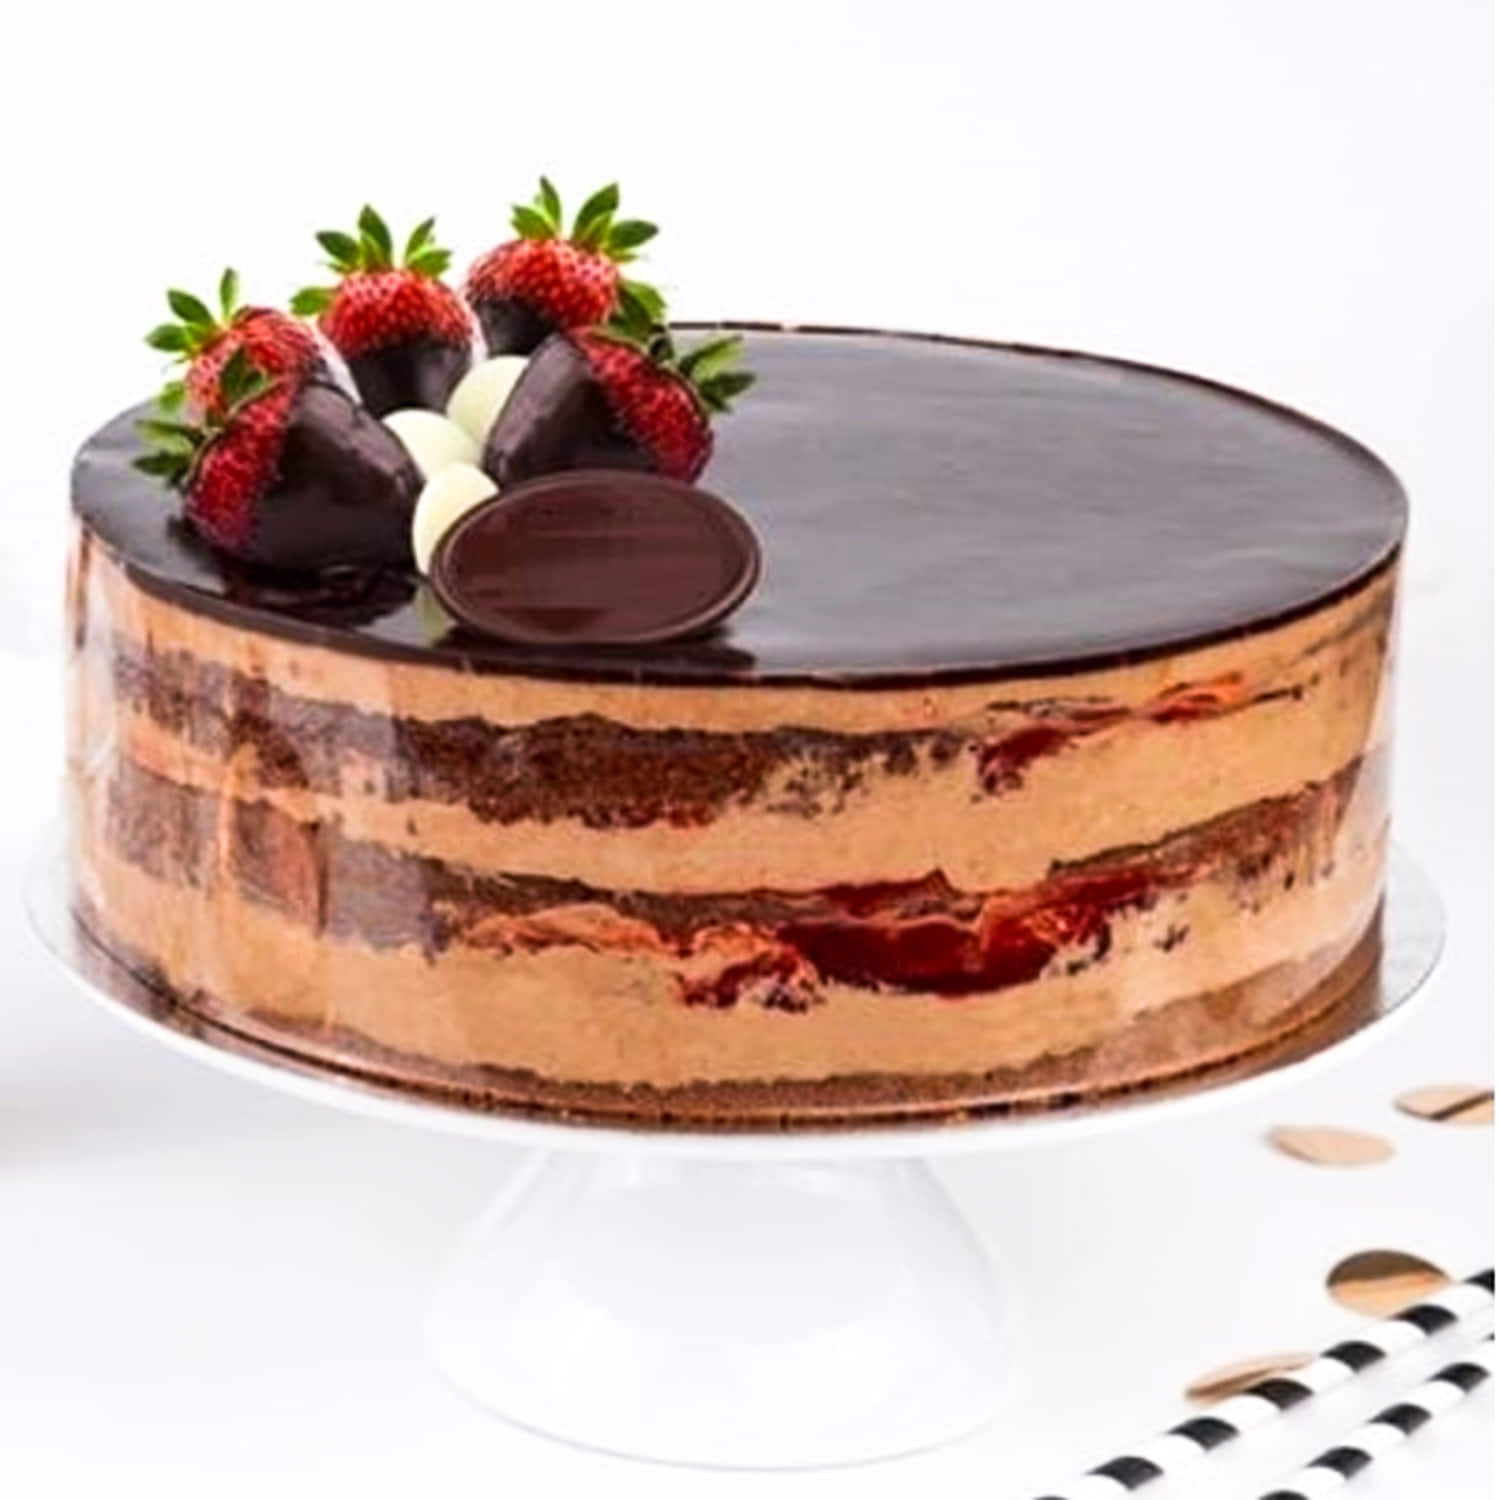 Cakes for Delivery Melbourne | $5 Melbourne Metro Areas